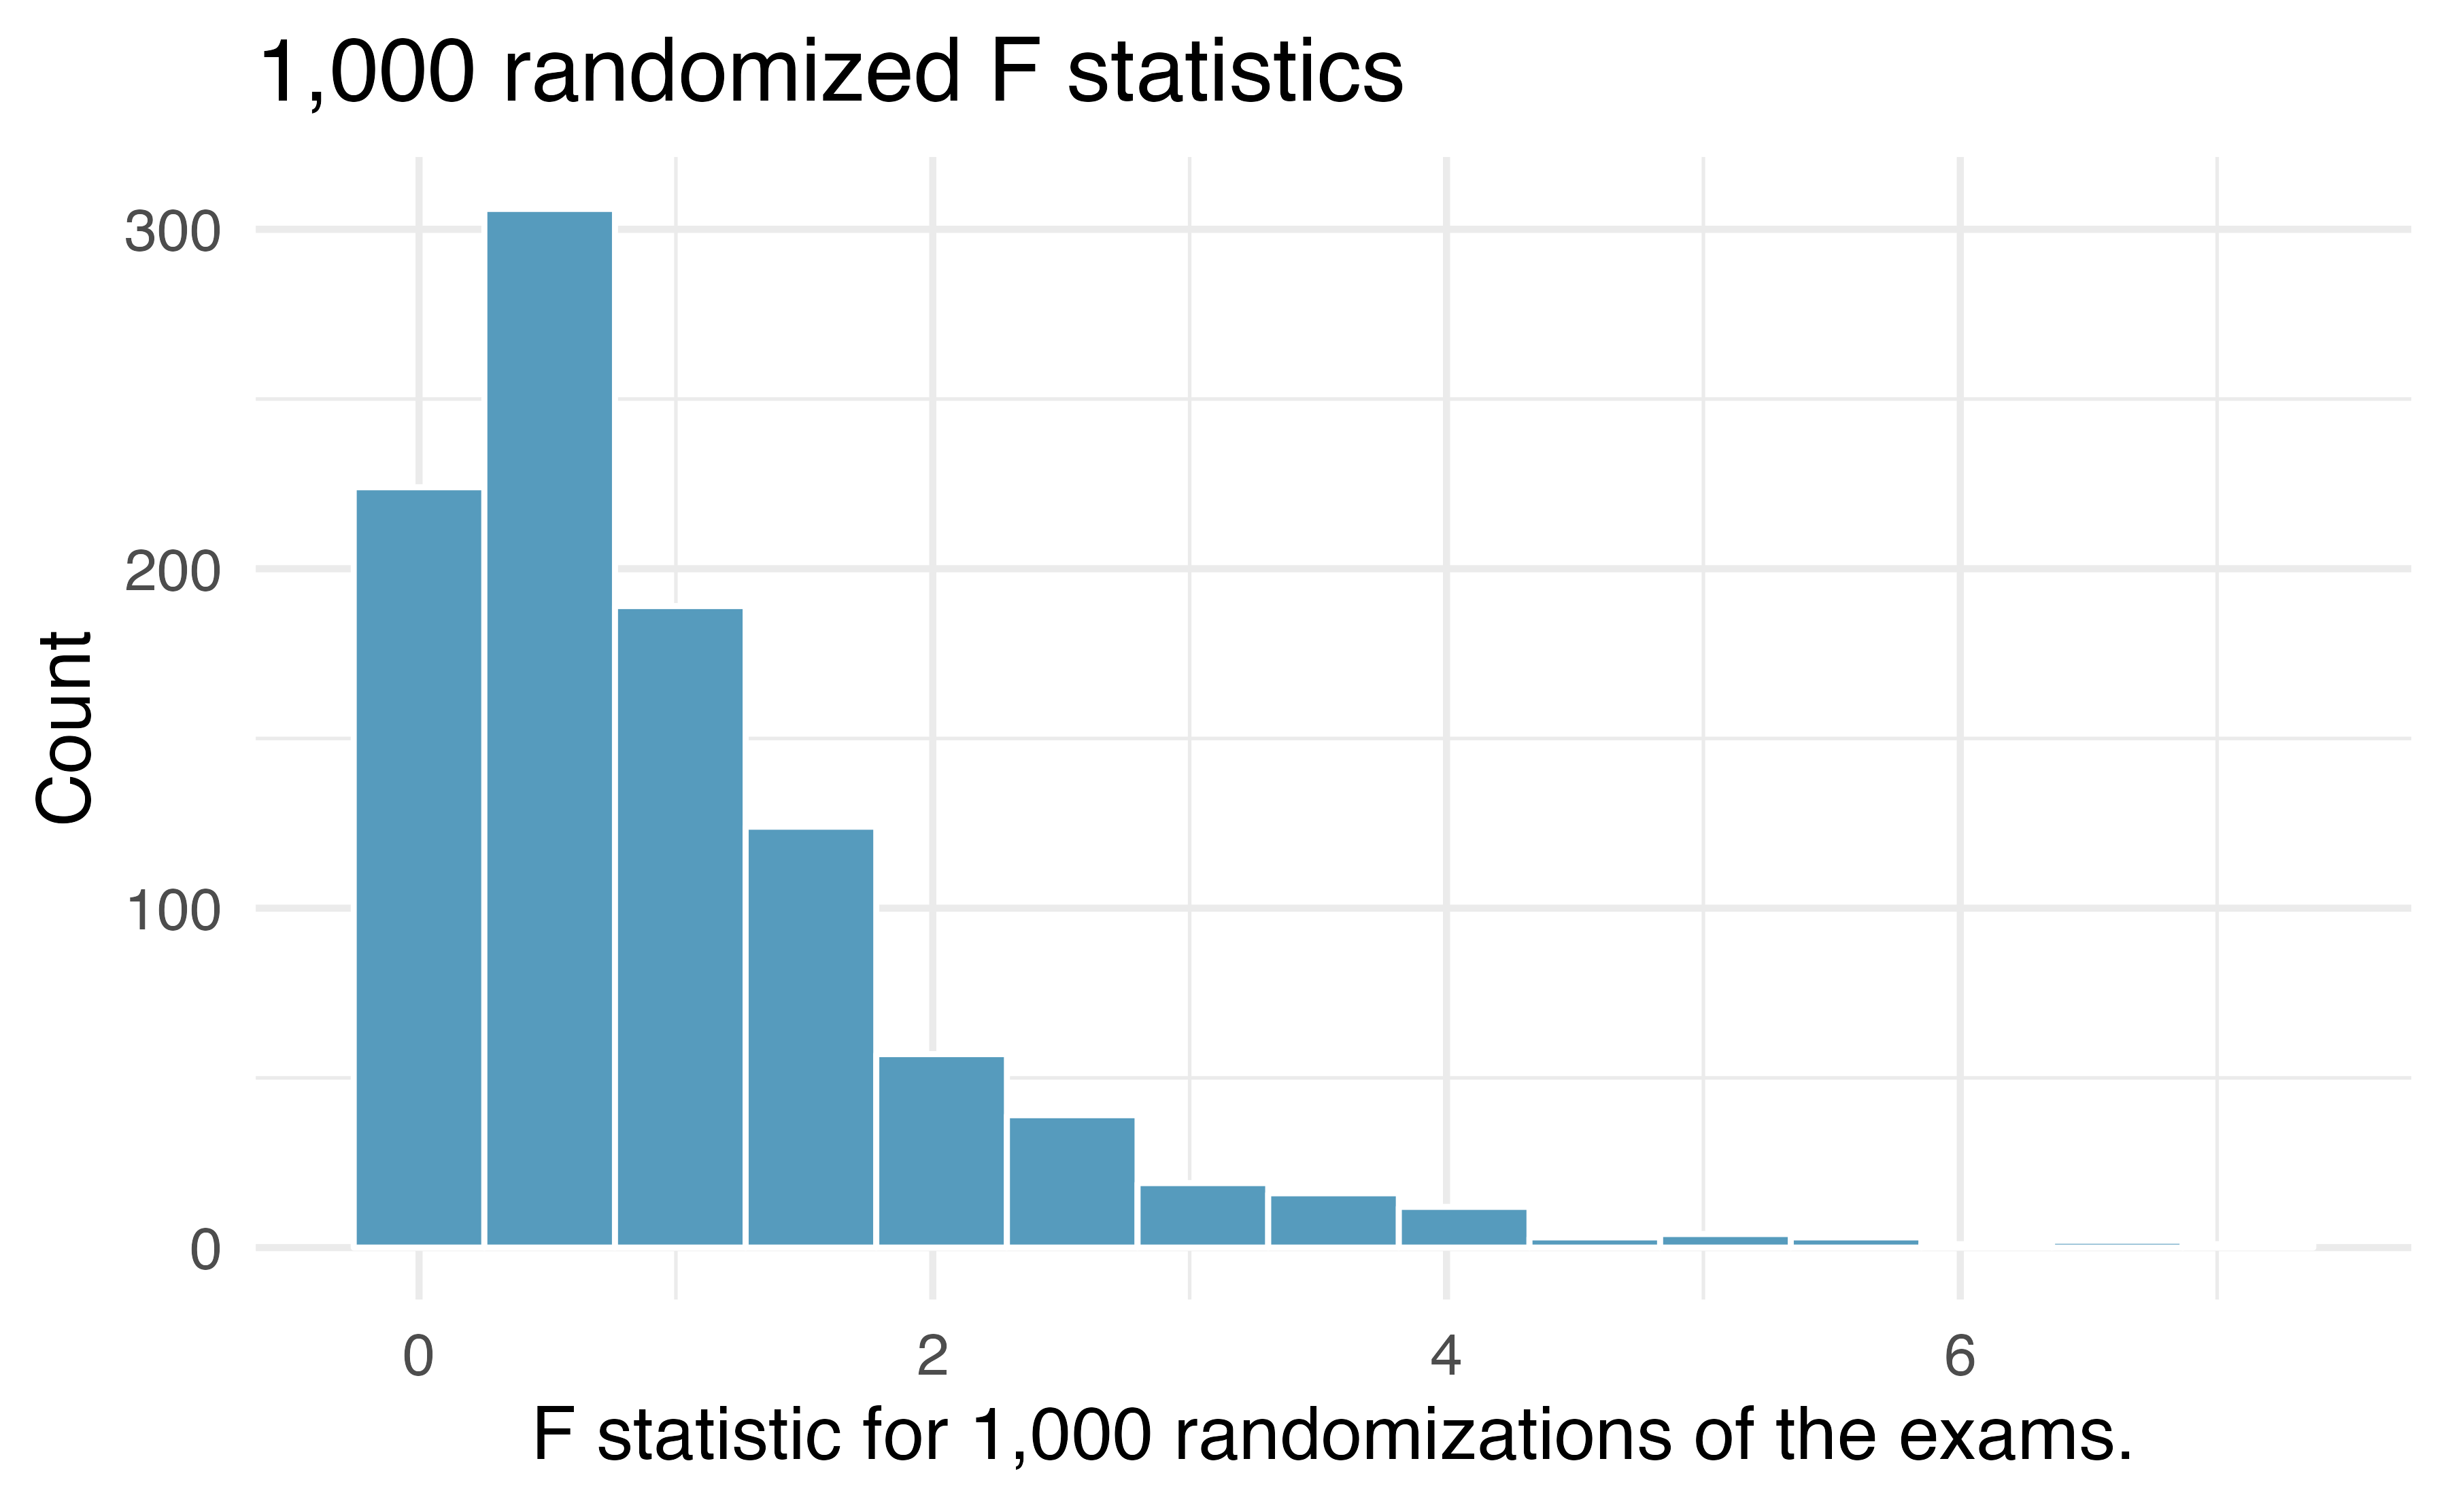 Histogram of the F statistics that were calculated from 1000 different randomizations of the exam type.  The distribution is right-skewed with most of the values less than 2.  The tail extends to about 6.